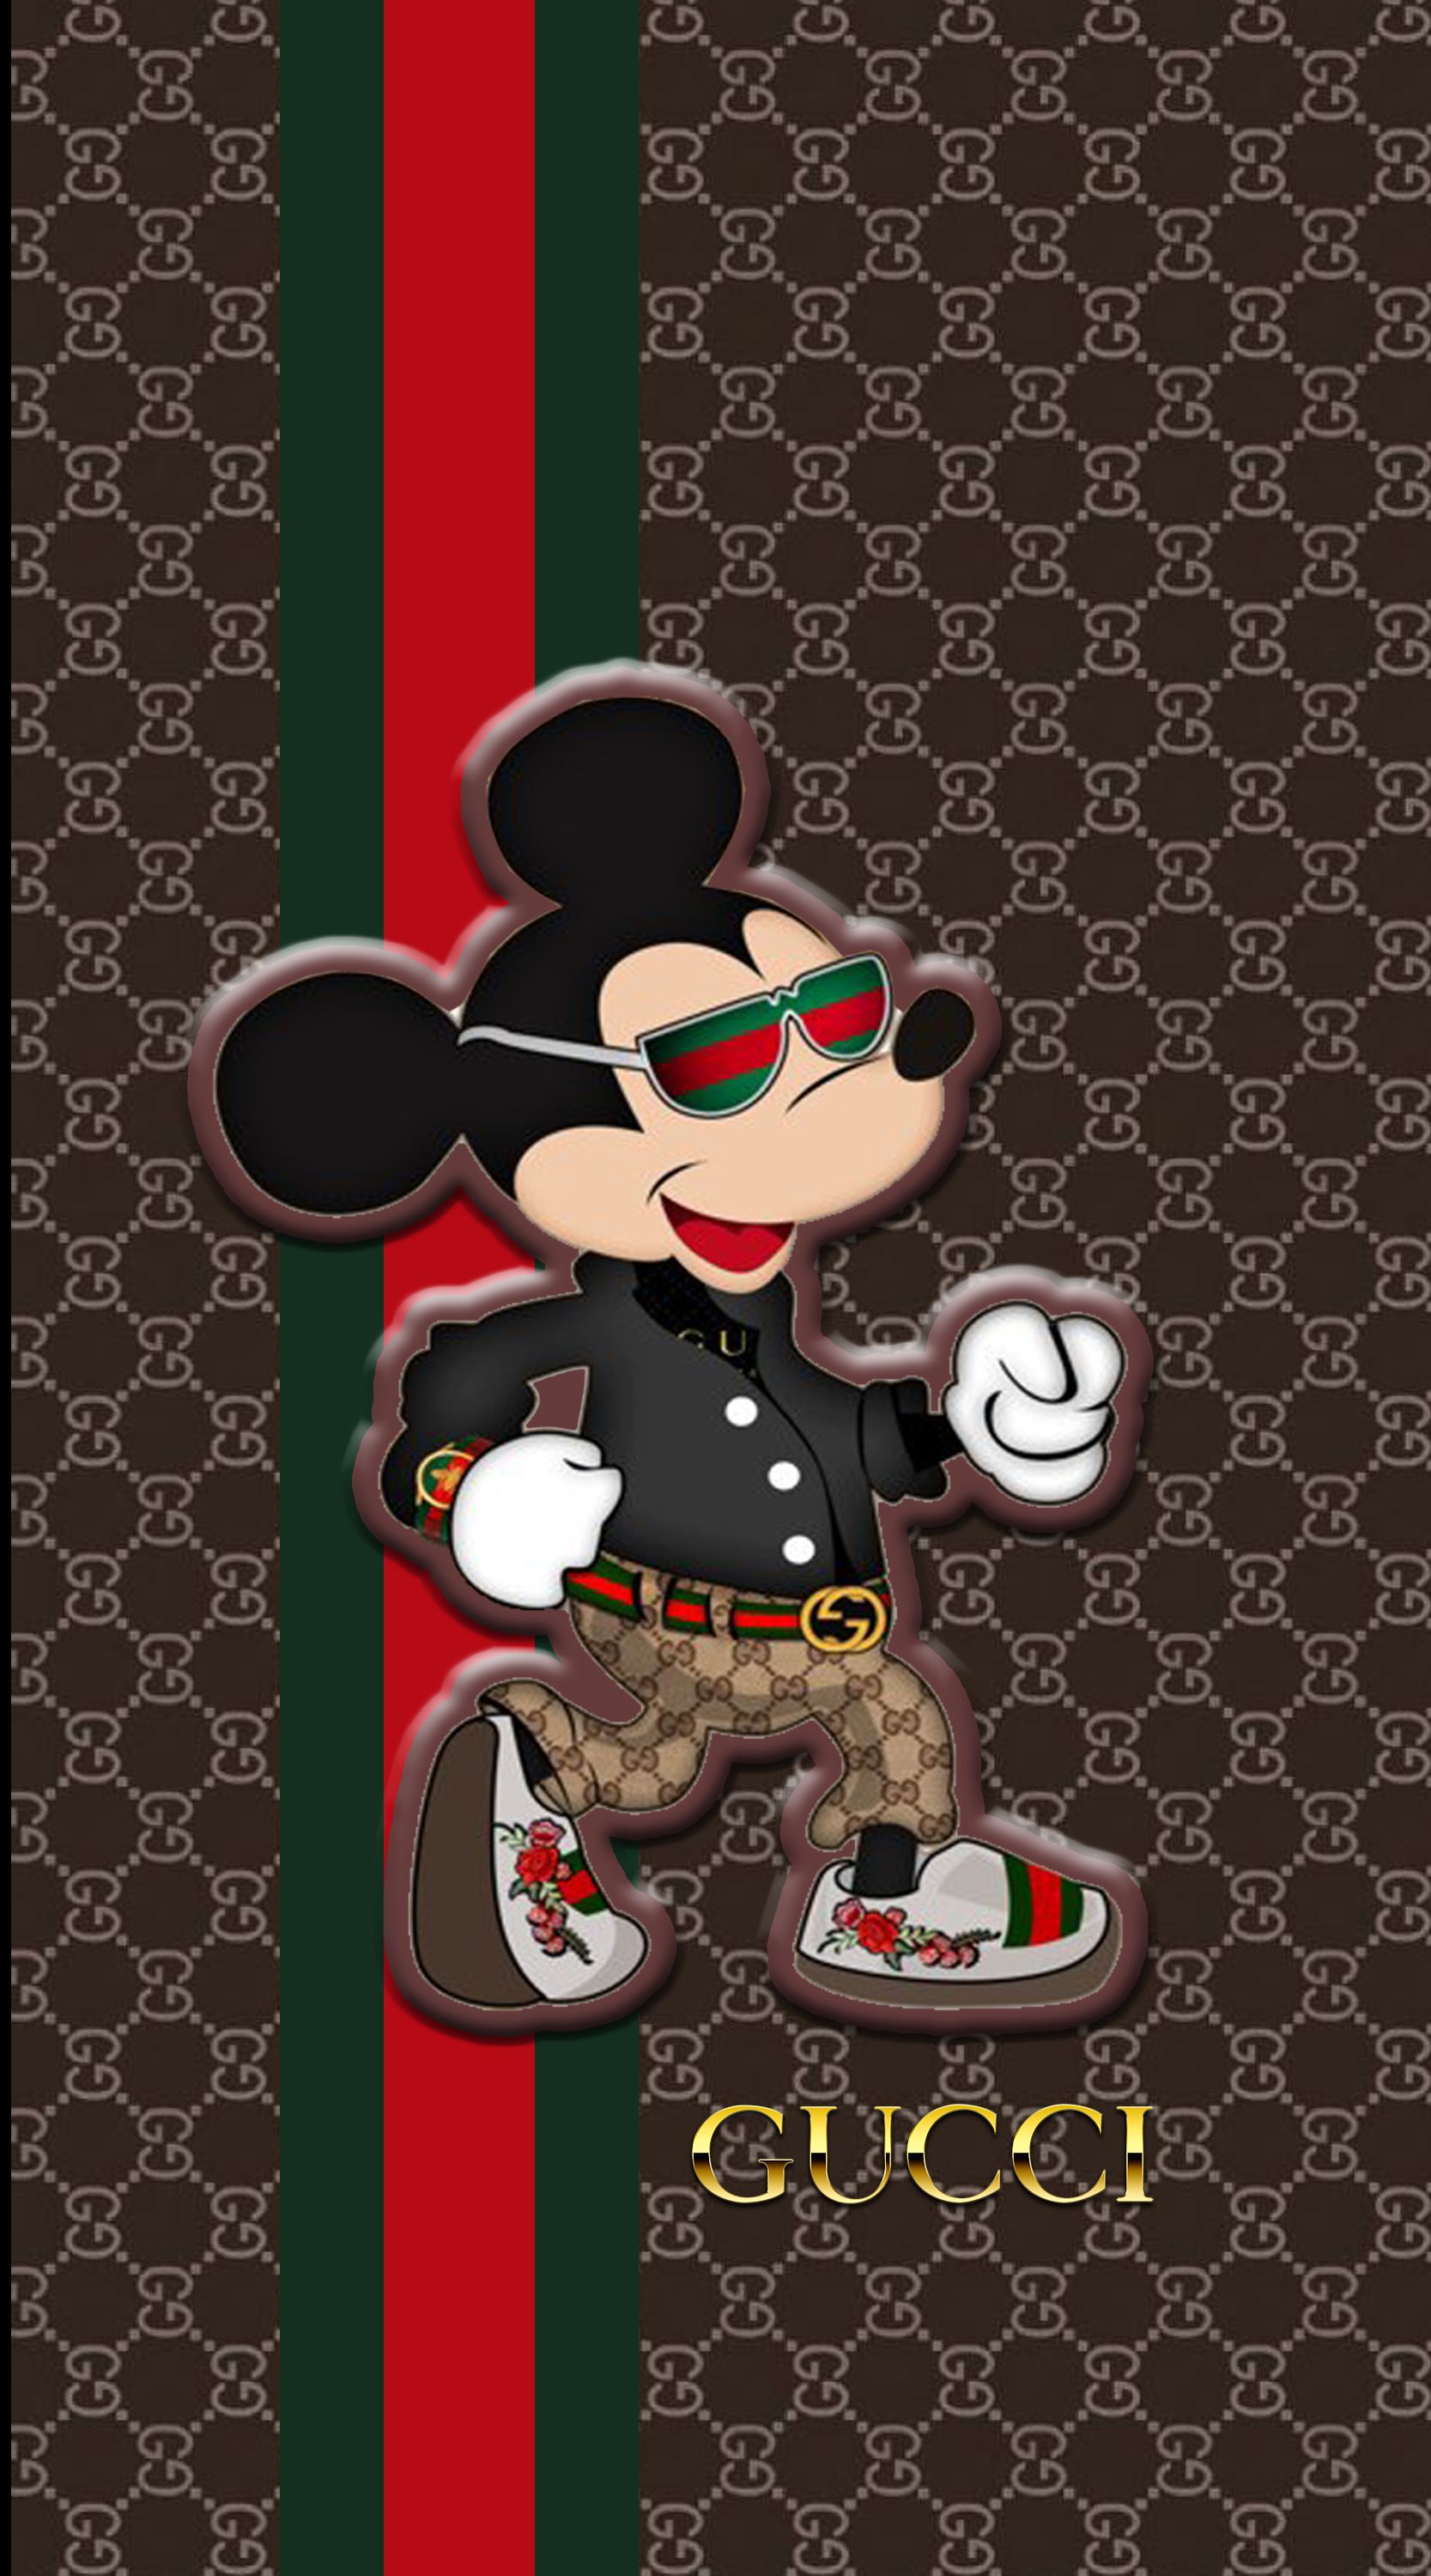 gucci mickey mouse wallpapers wallpaper cave on gucci shoes mickey mouse wallpapers